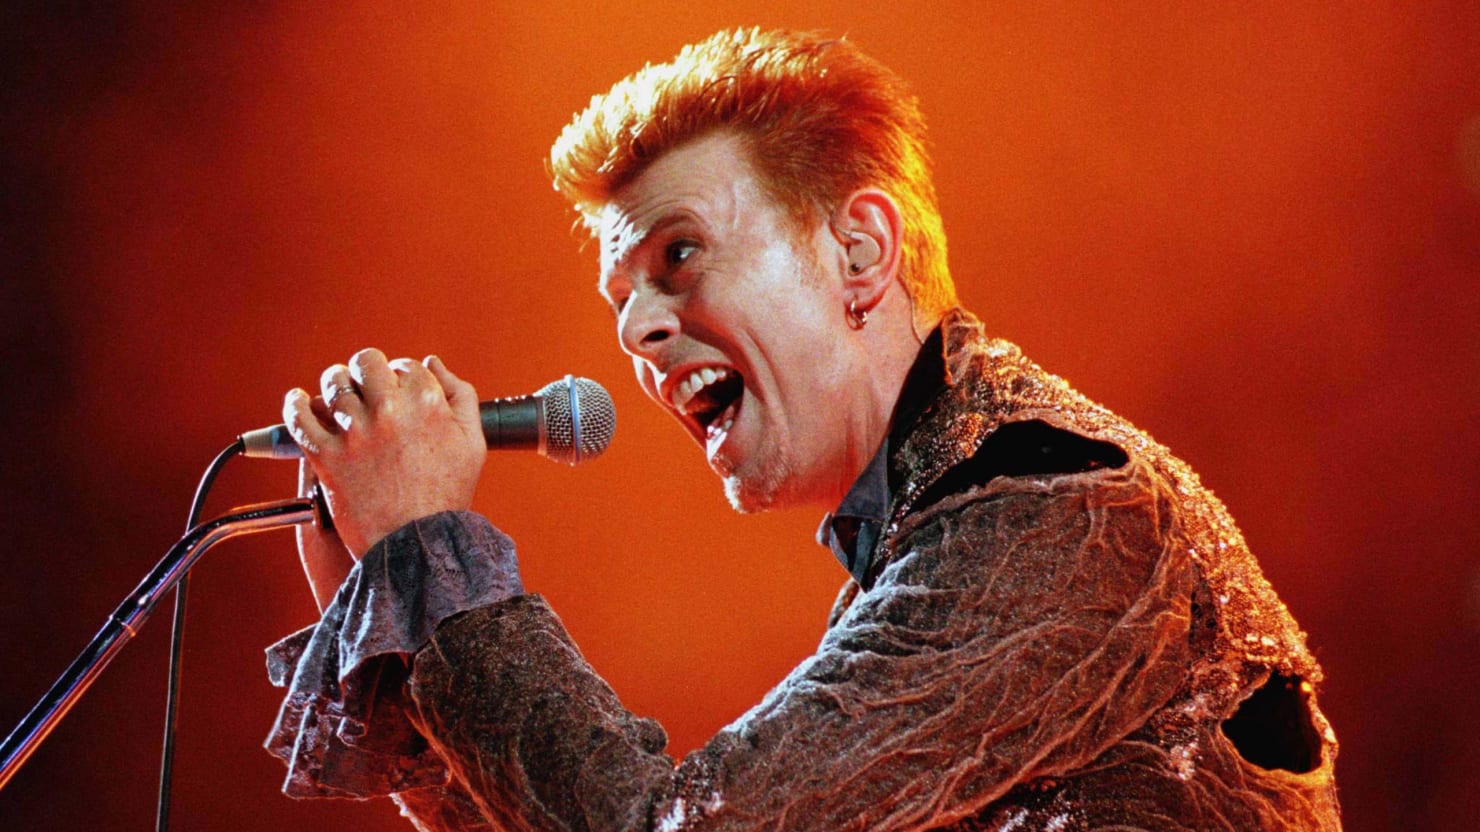 STATEMENT FROM BILLY ON DAVID BOWIE